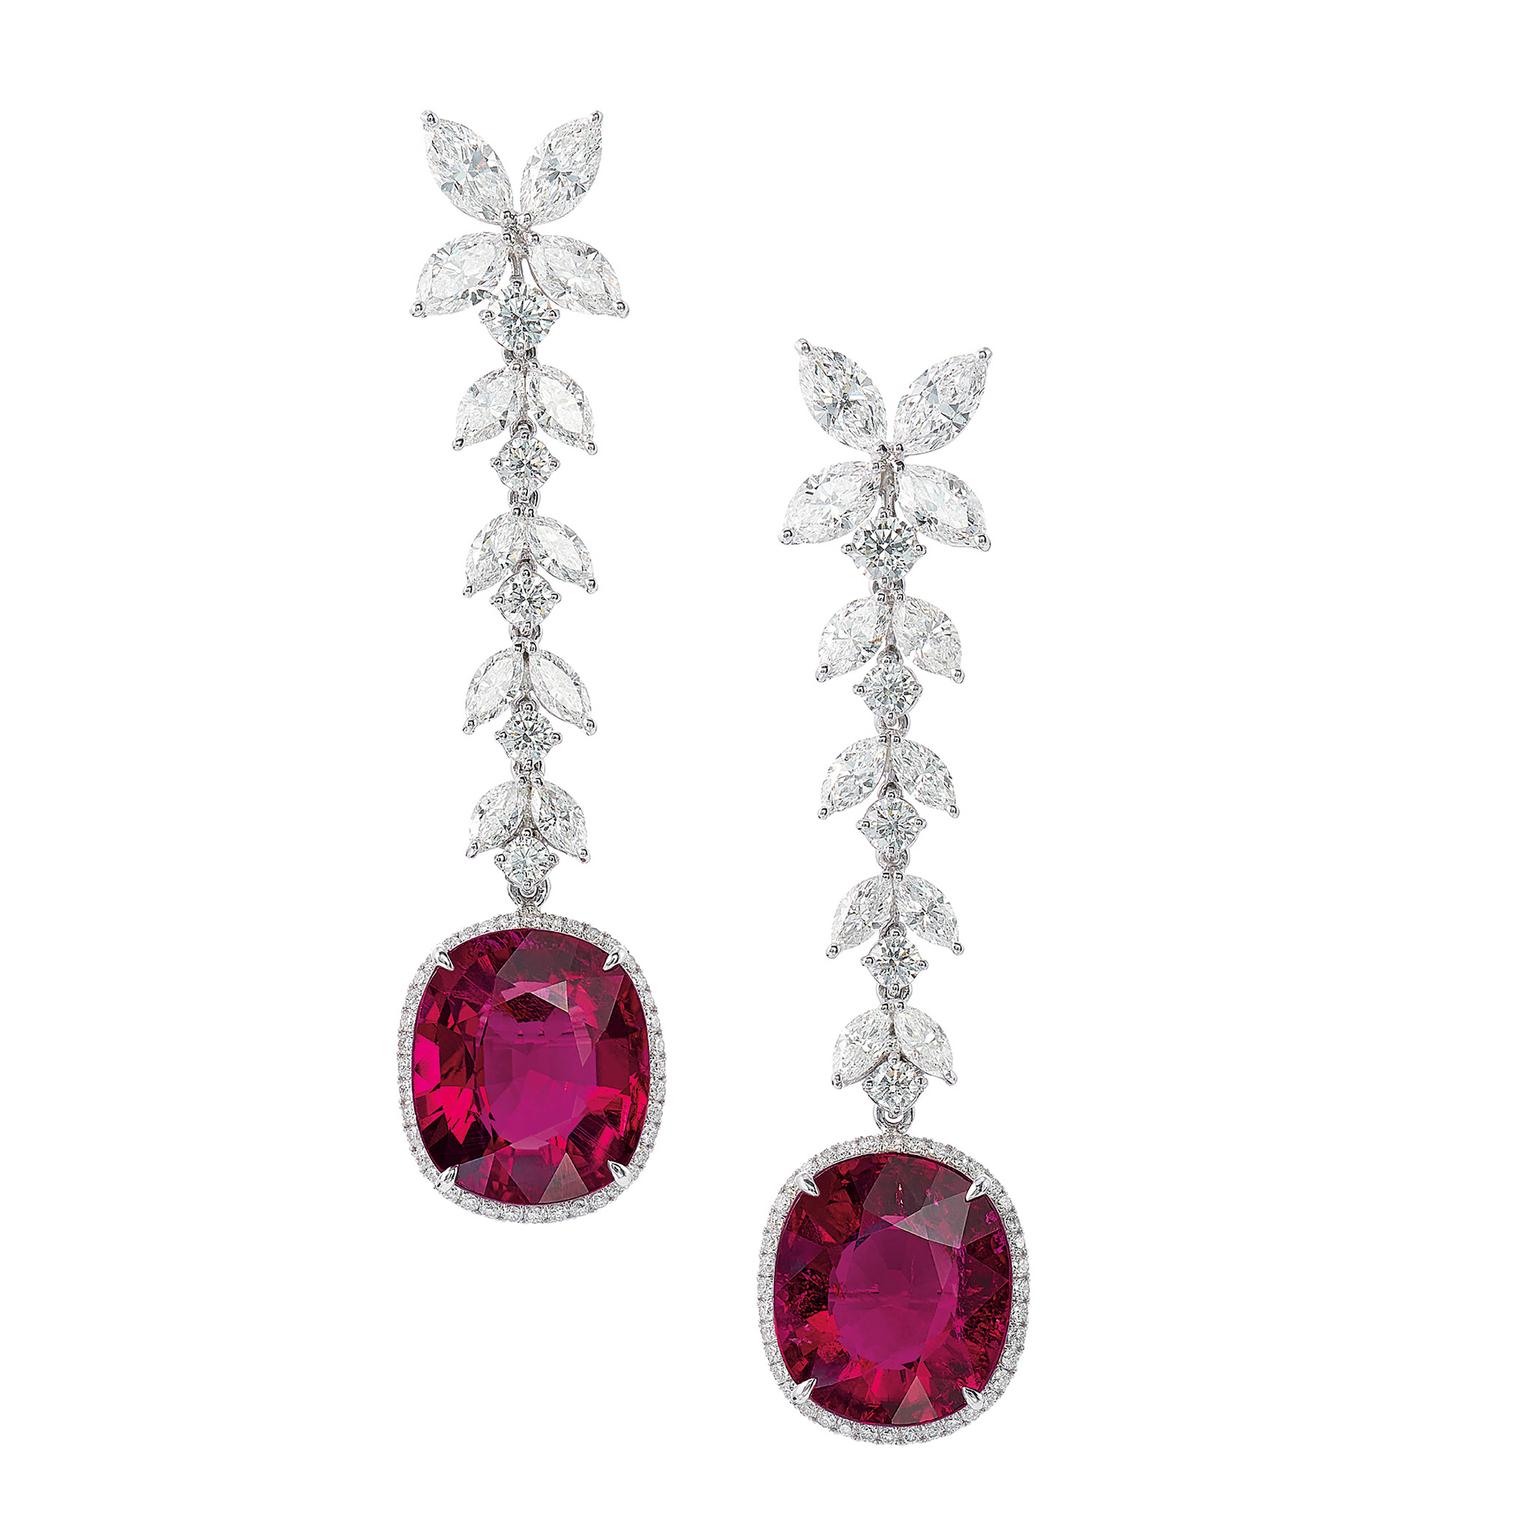 Lot 586 Tourmaline and diamonds earrings for Phillips auction